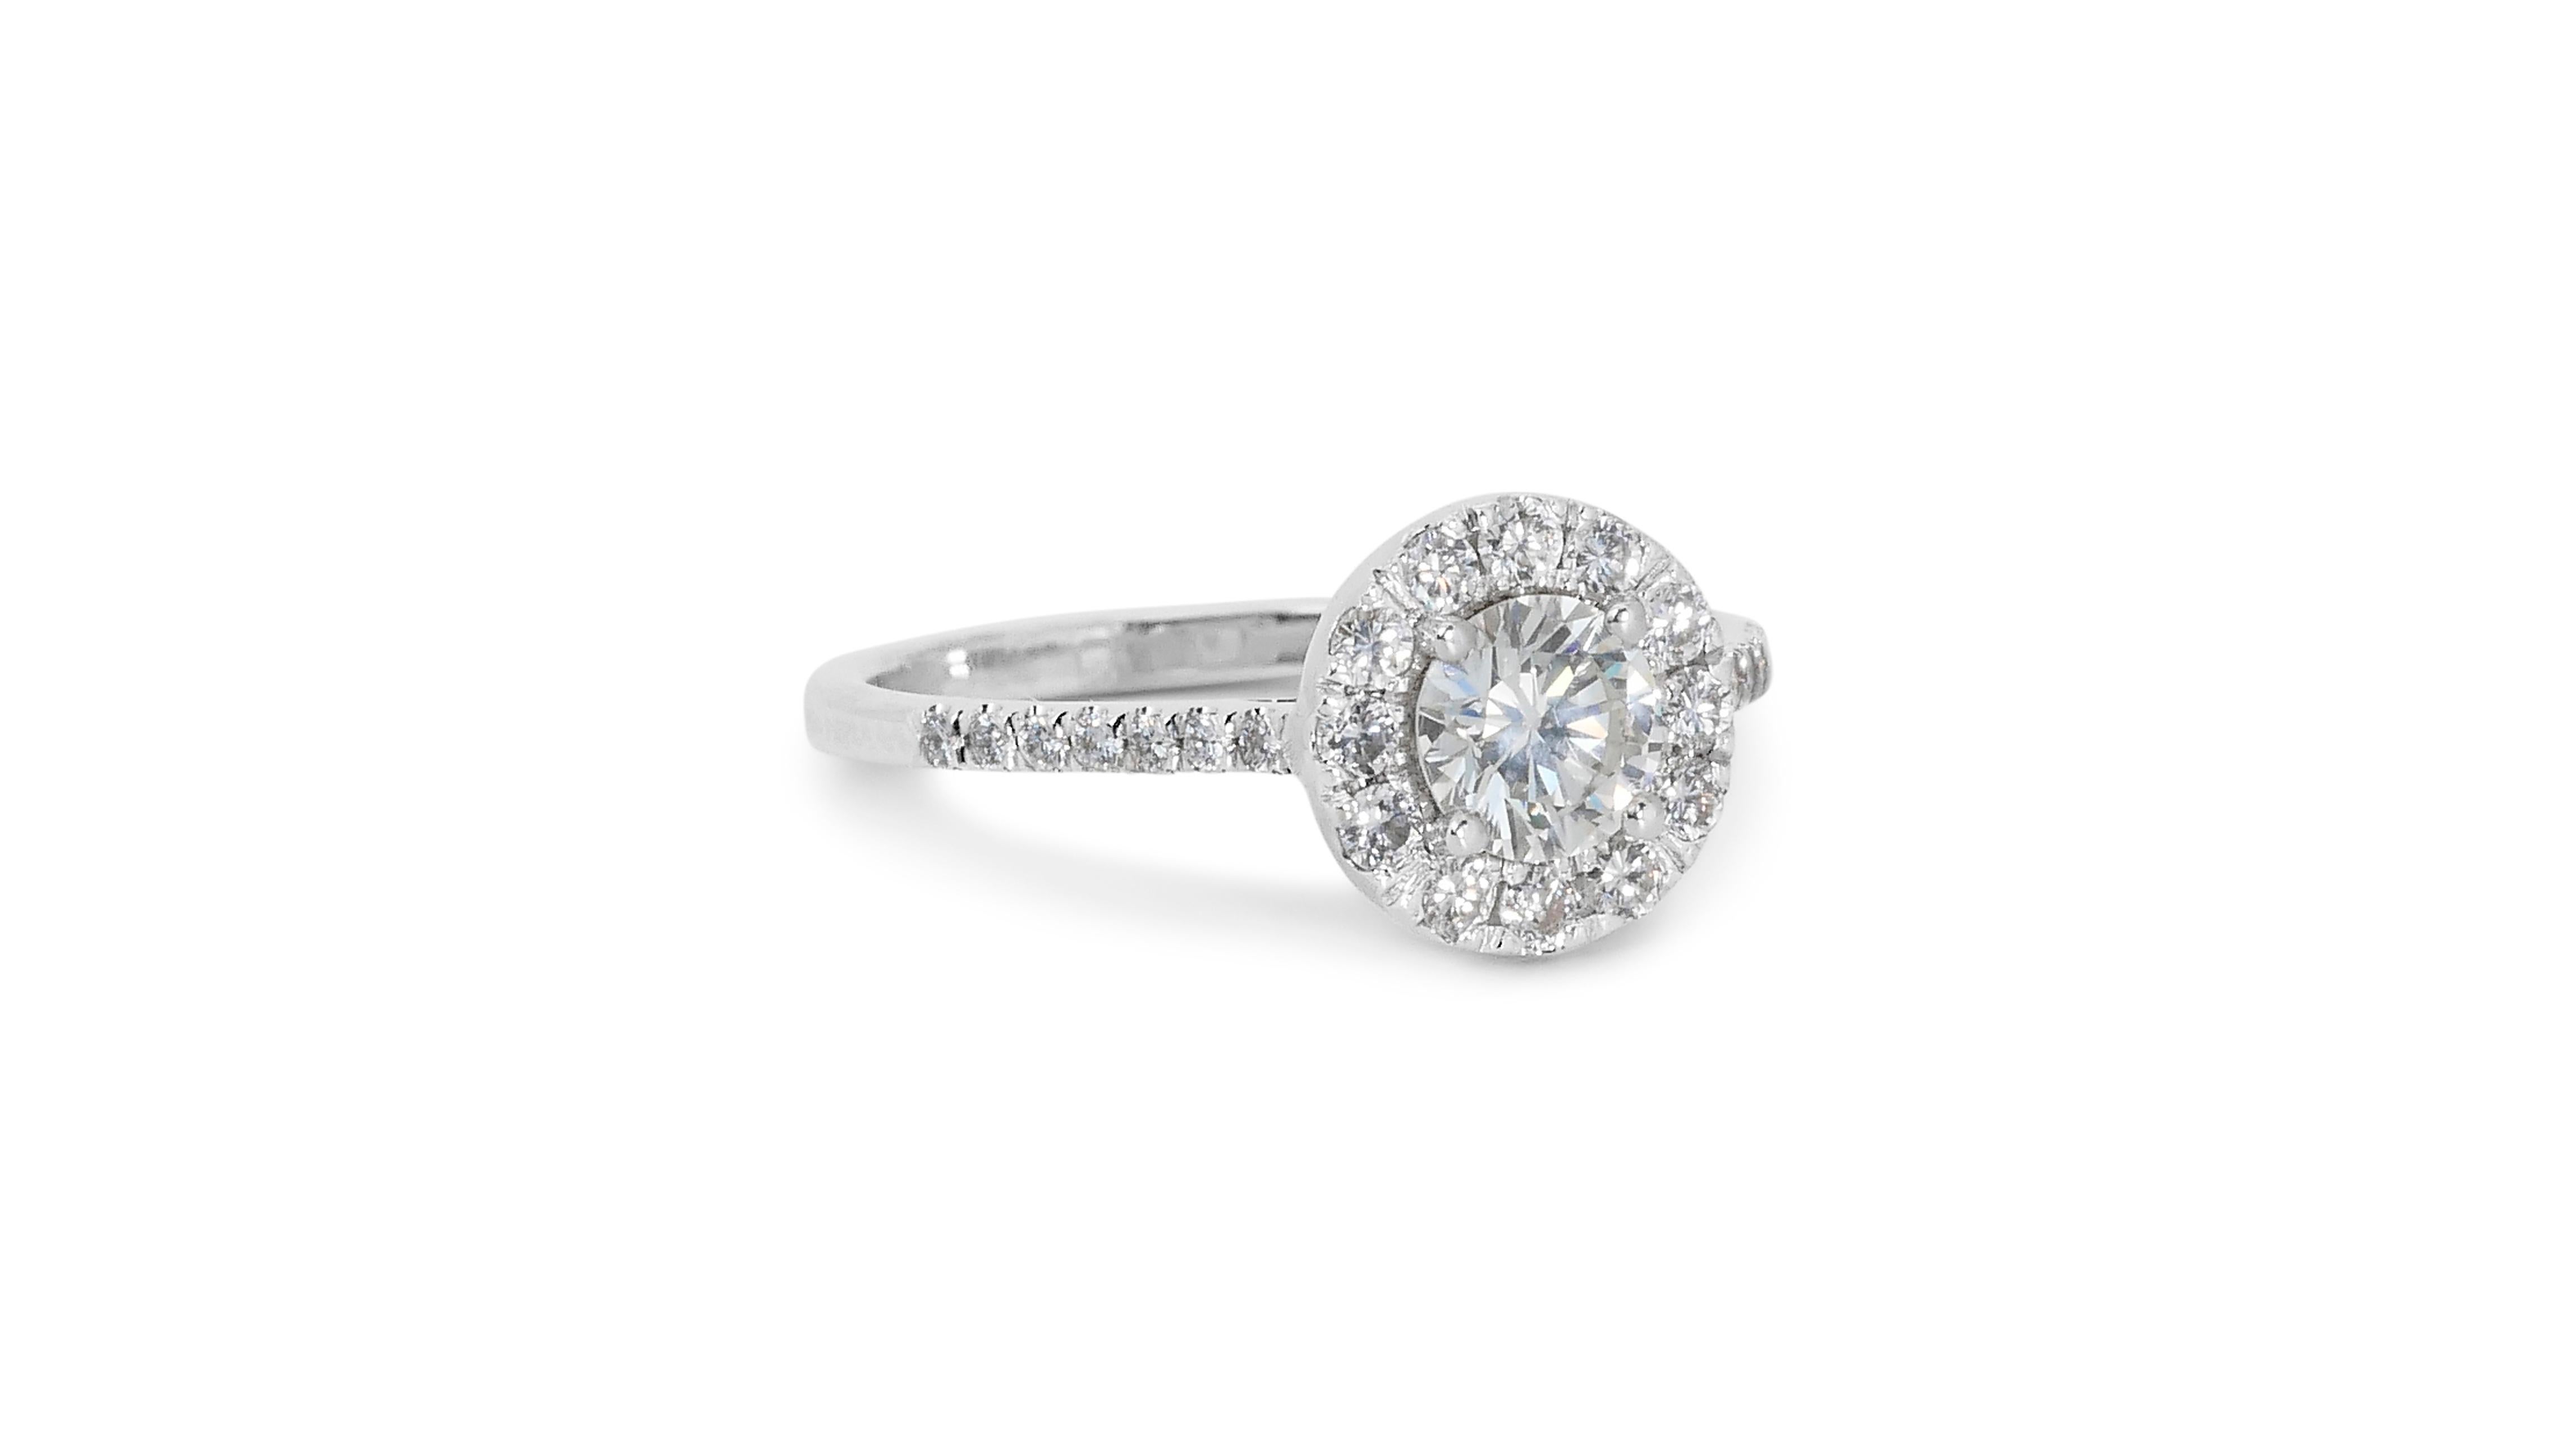 Glamorous 1.30ct Diamonds Halo Ring in 18k White Gold - GIA Certified

This breathtaking diamond halo ring, expertly crafted in lustrous 18K white gold, showcases a stunning 1.00-carat round brilliant main diamond. Encircling the central diamond are